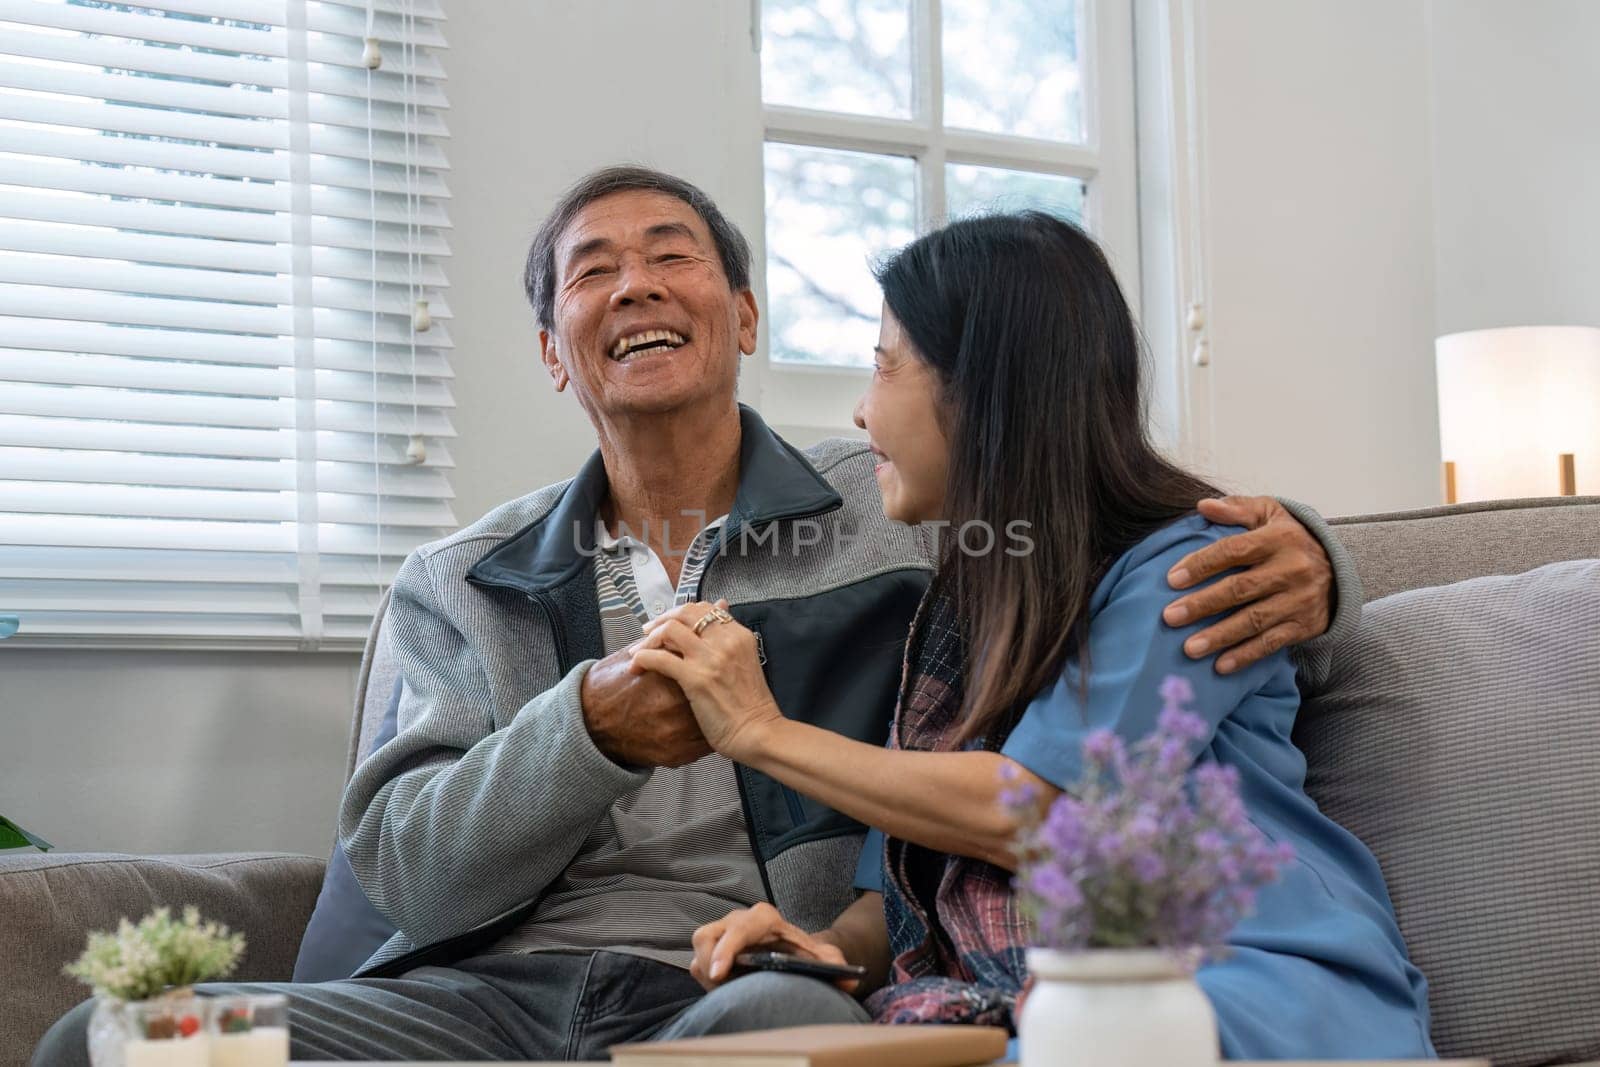 A man and woman are sitting on a couch, the man is holding the woman's hand. Scene is warm and affectionate